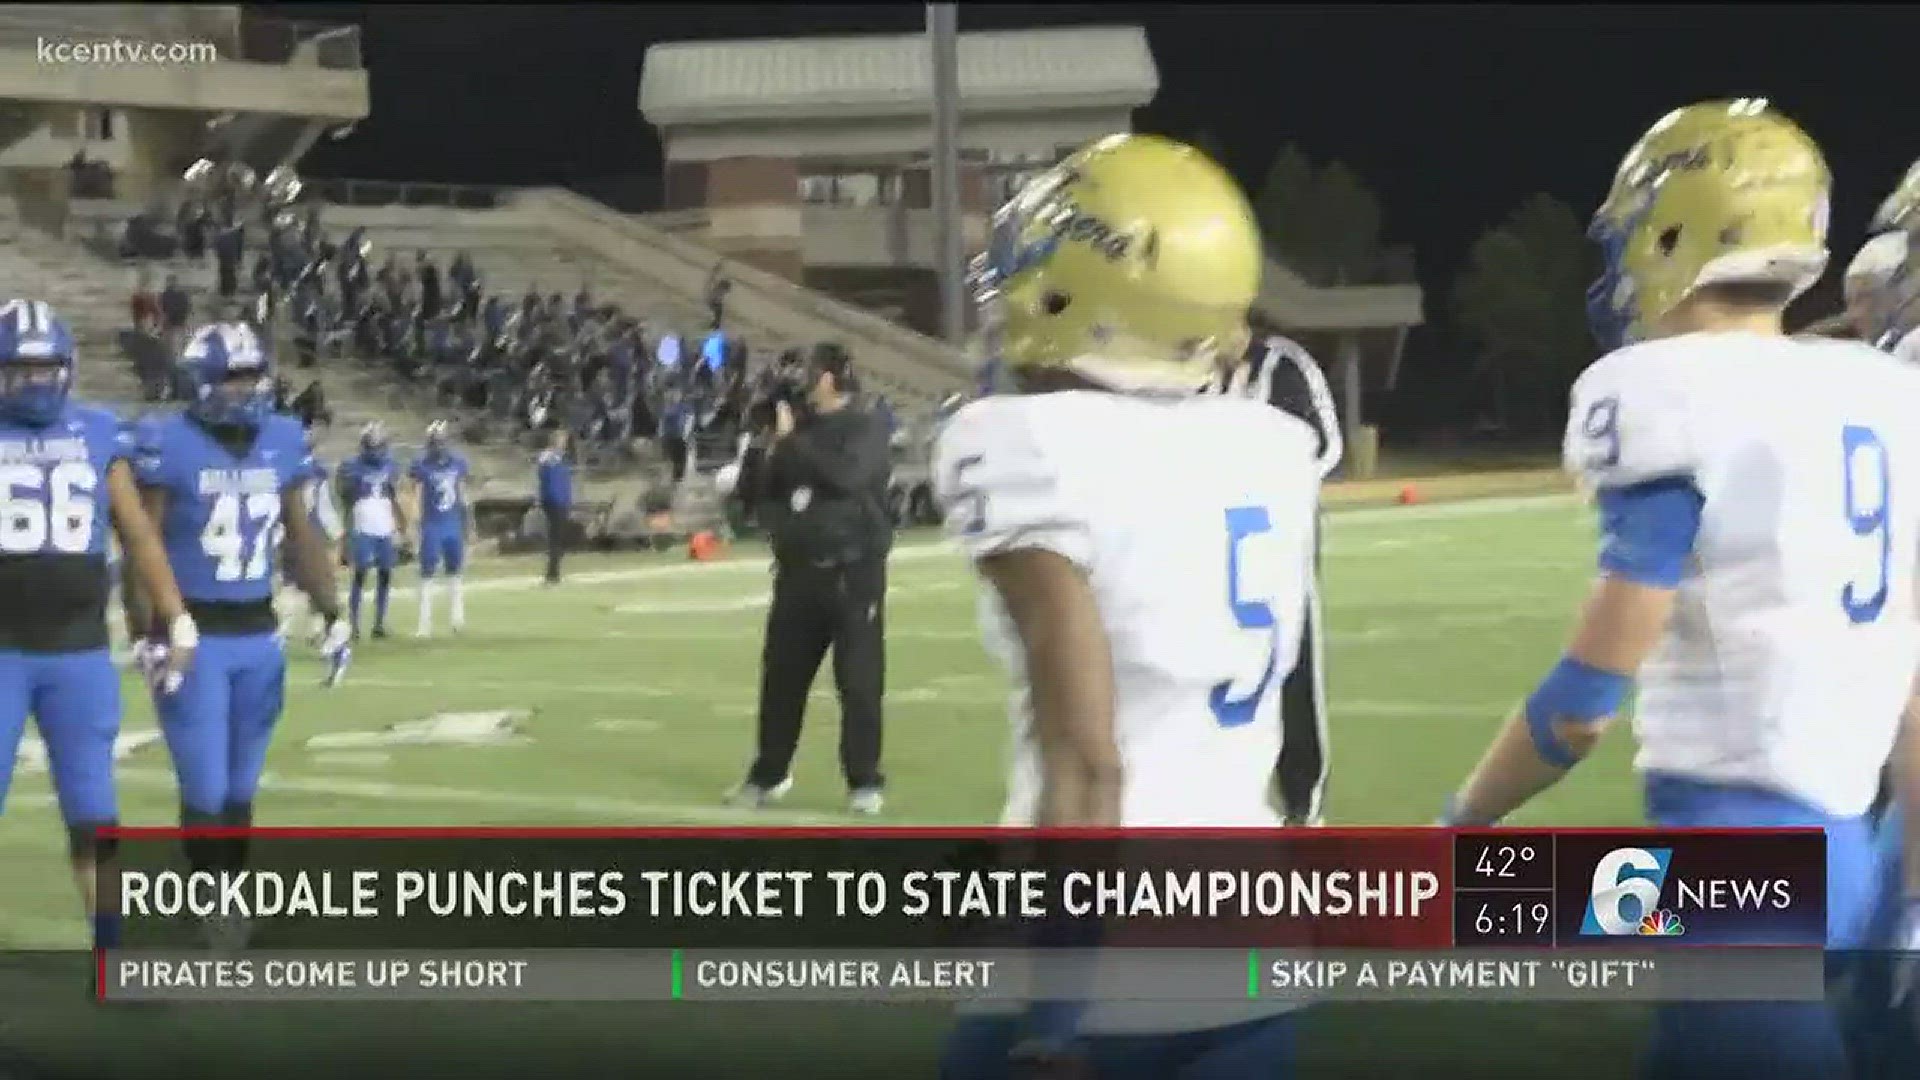 Rockdale punches ticket to state championship.